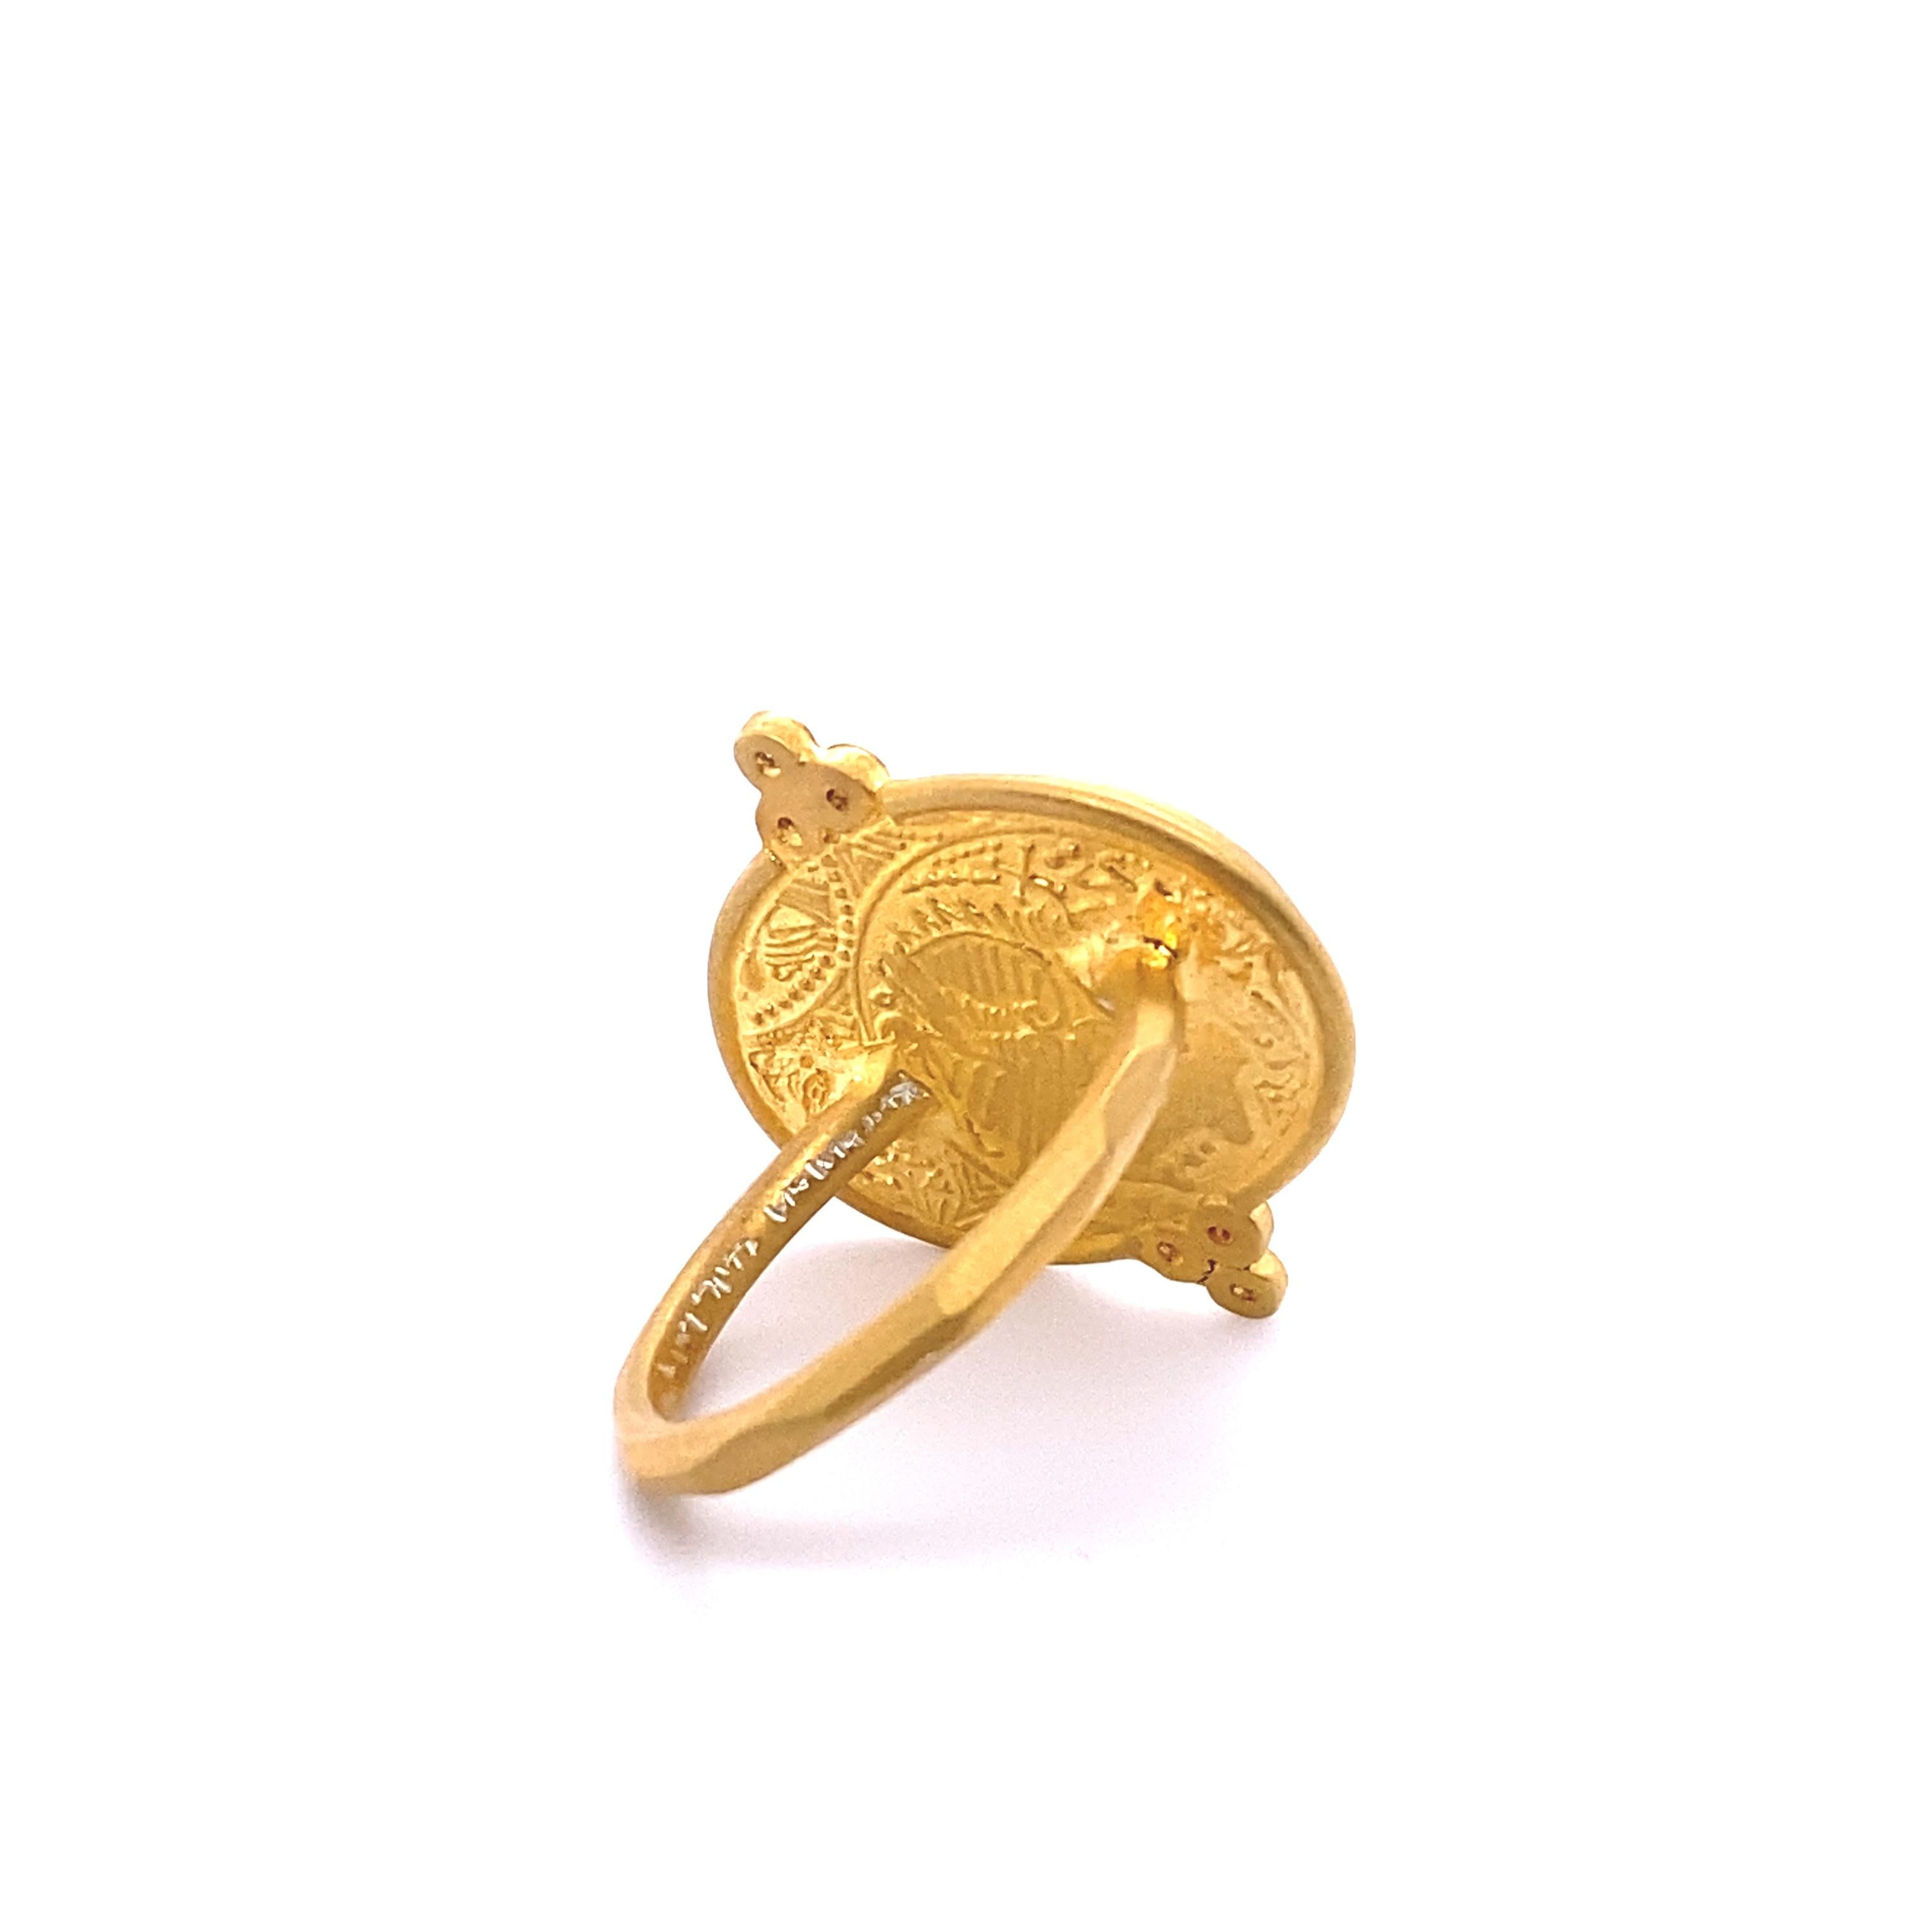 0.06 Carat Diamond Mother of Pearl Ring w/ Carved Crane Bird Motif 24K Gold For Sale 2